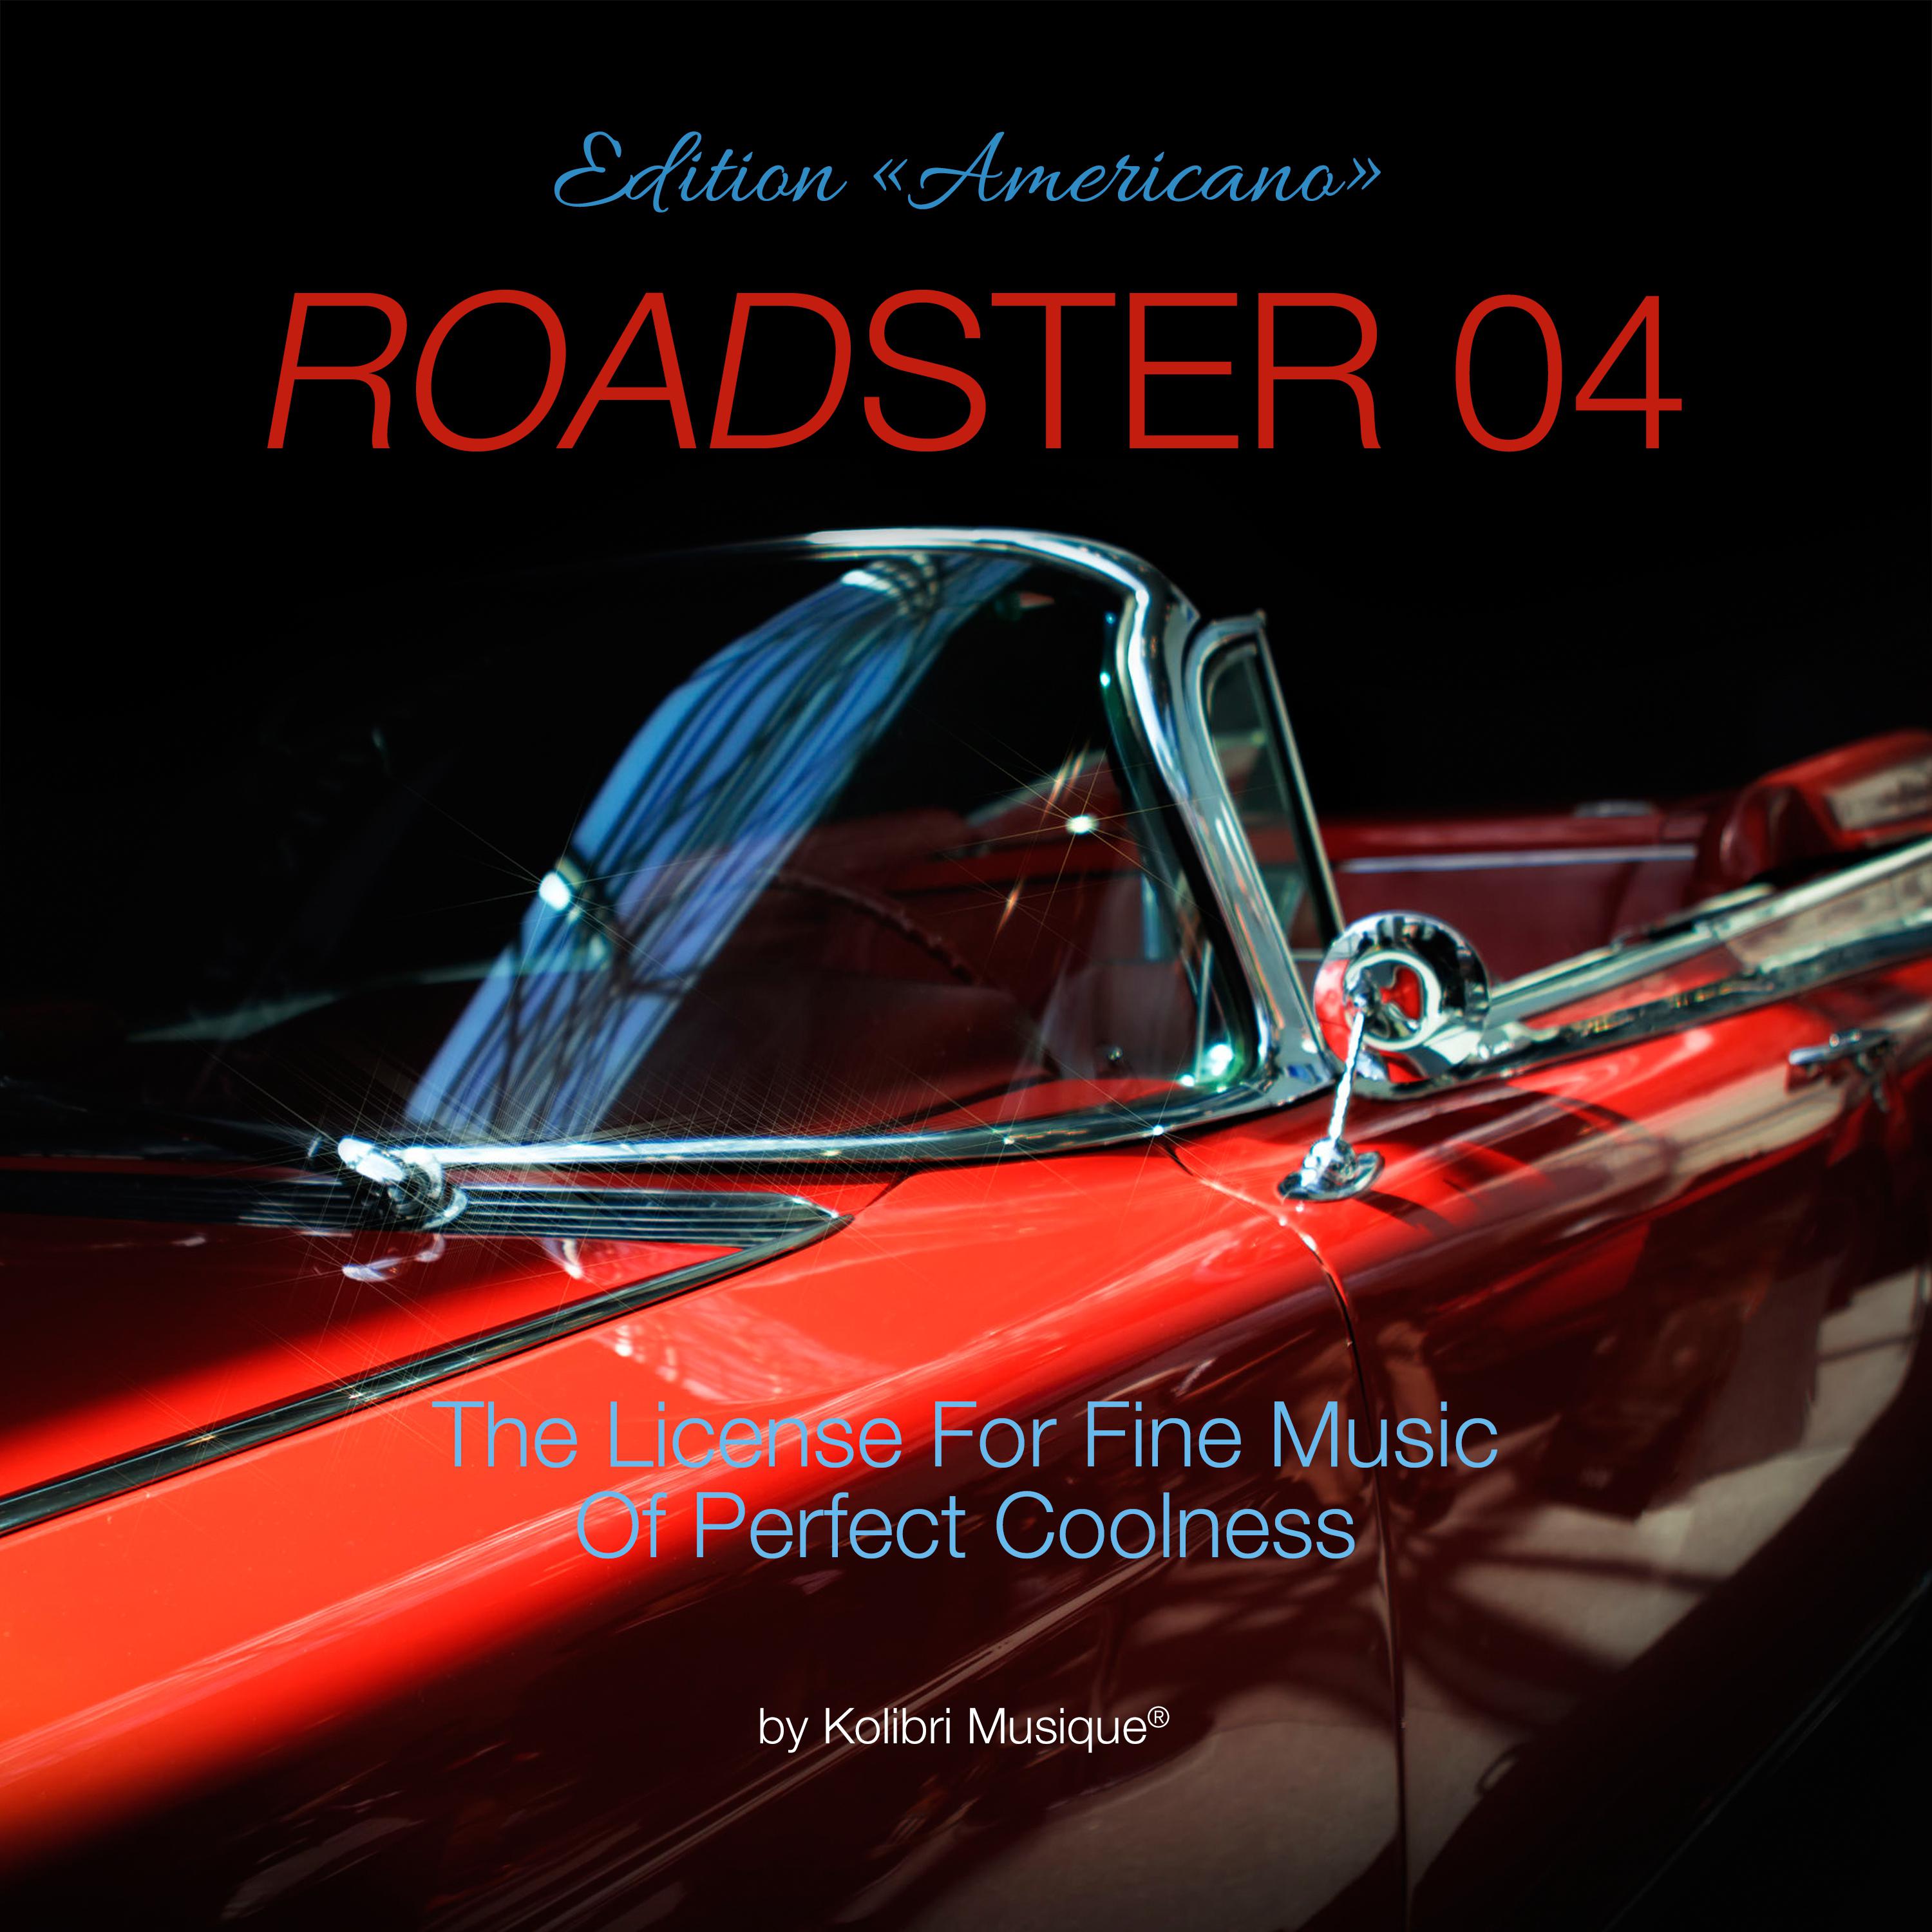 Roadster 04 - The License for Fine Music of Perfect Coolness Edition Americano